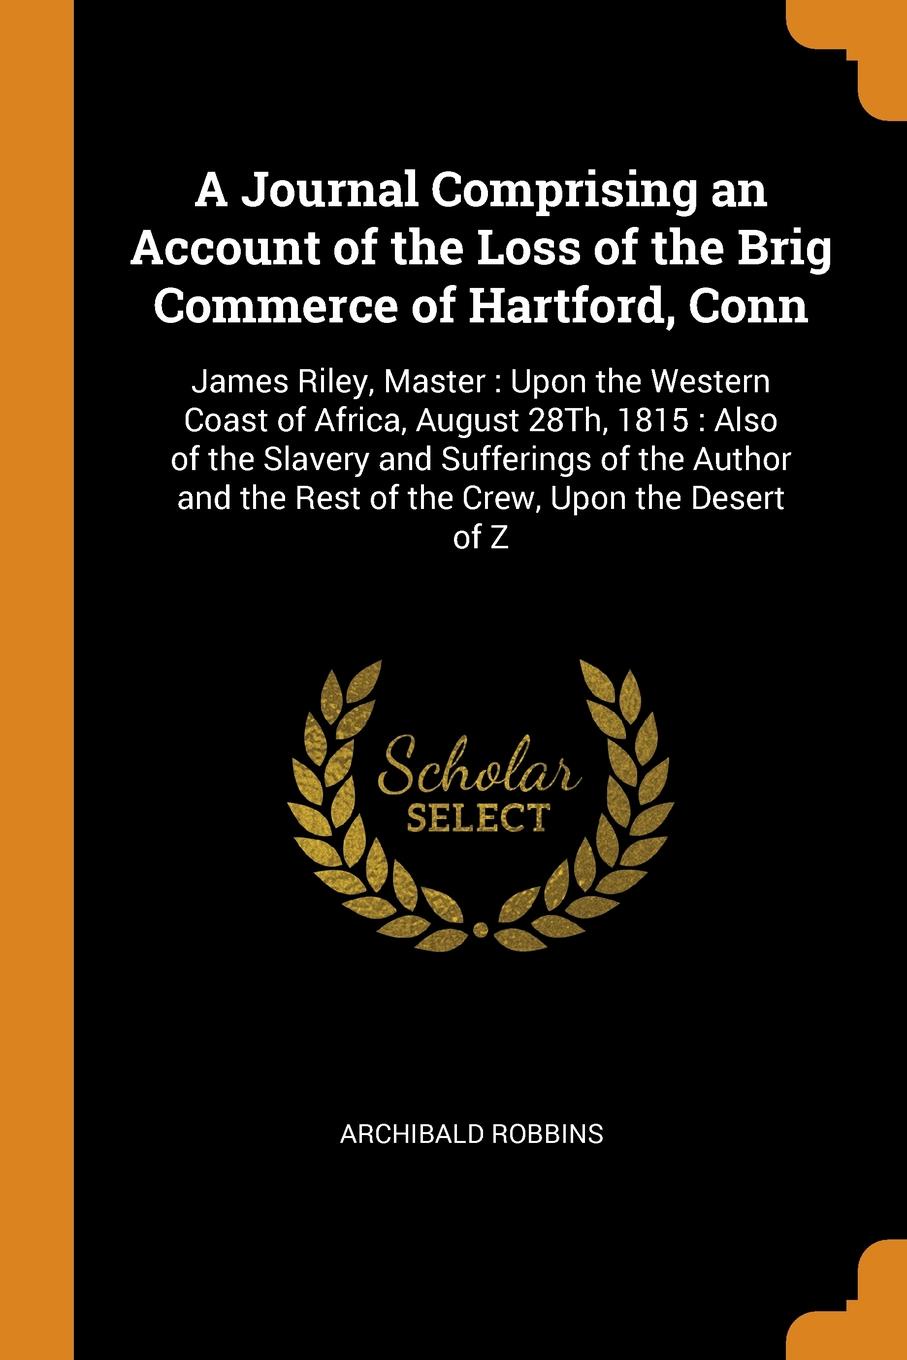 A Journal Comprising an Account of the Loss of the Brig Commerce of Hartford, Conn. James Riley, Master : Upon the Western Coast of Africa, August 28Th, 1815 : Also of the Slavery and Sufferings of the Author and the Rest of the Crew, Upon the Des...